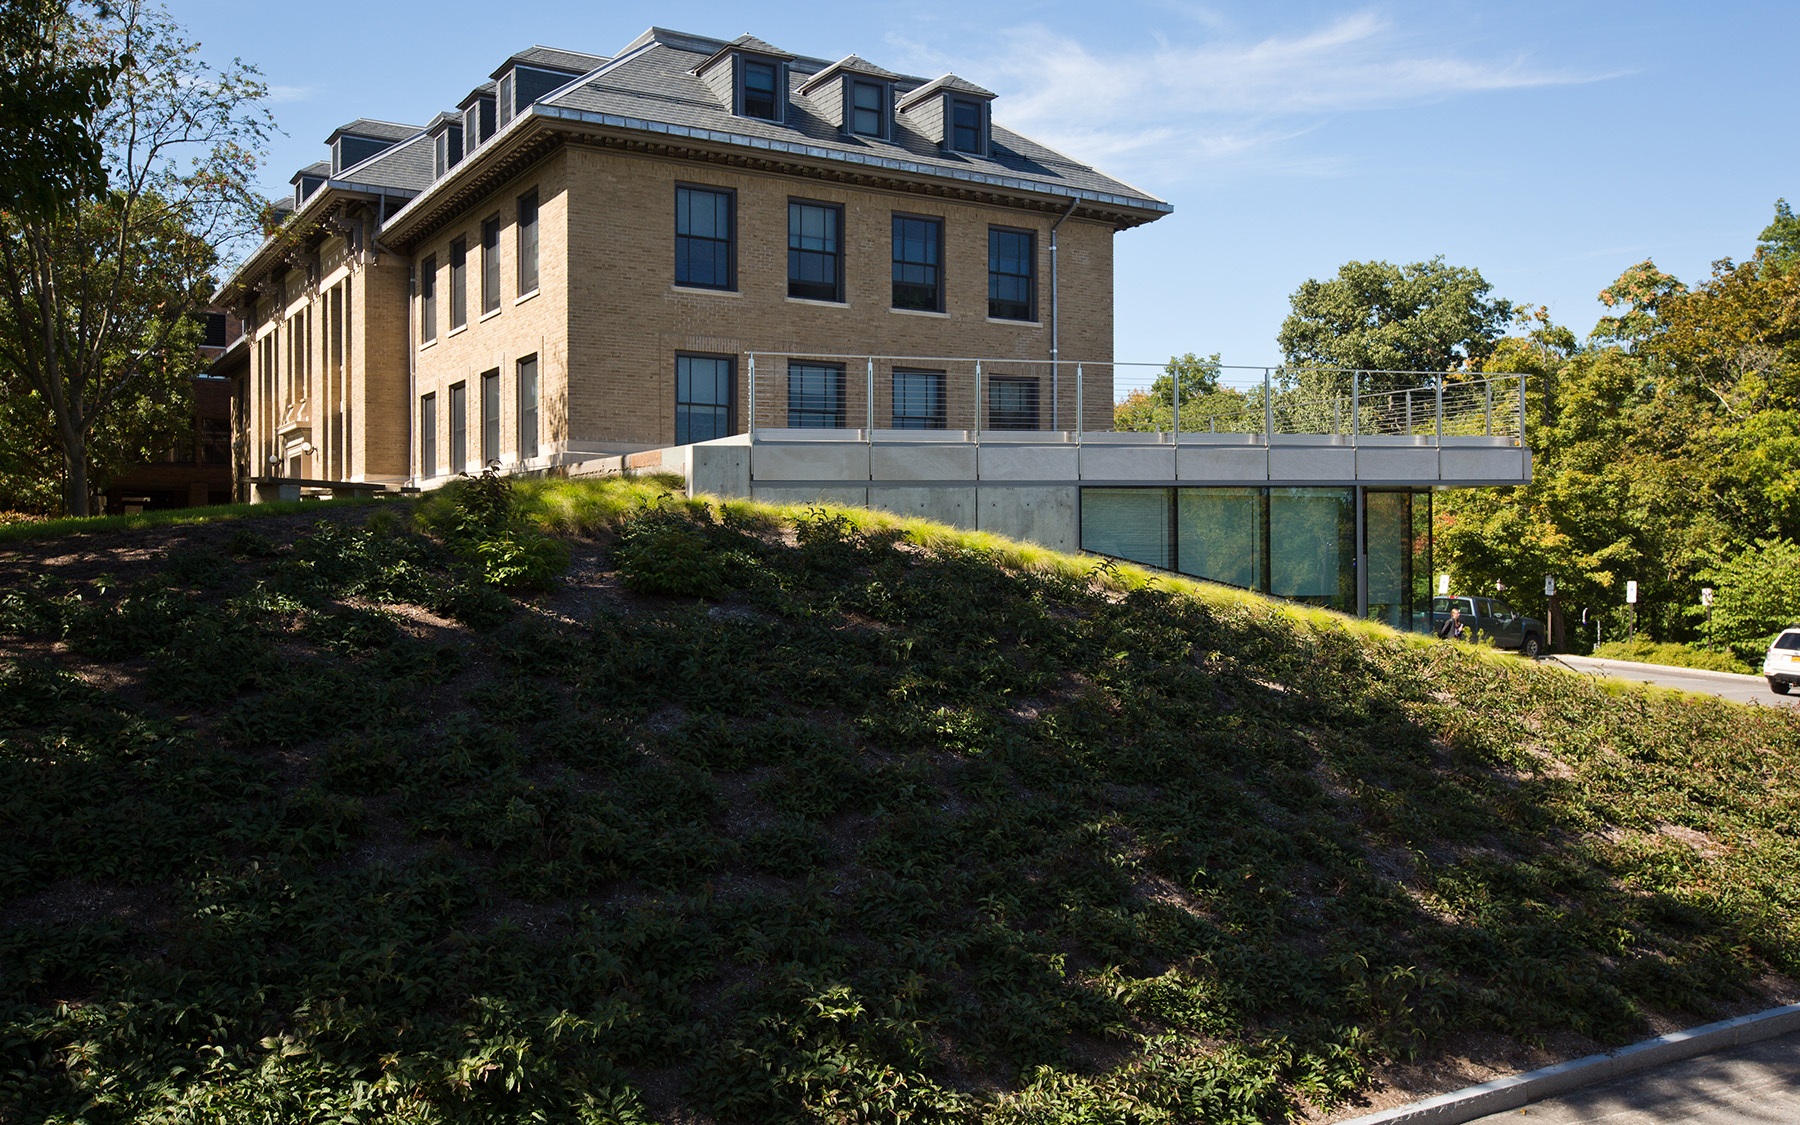 Fernow Hall blends into the surrounding landscape